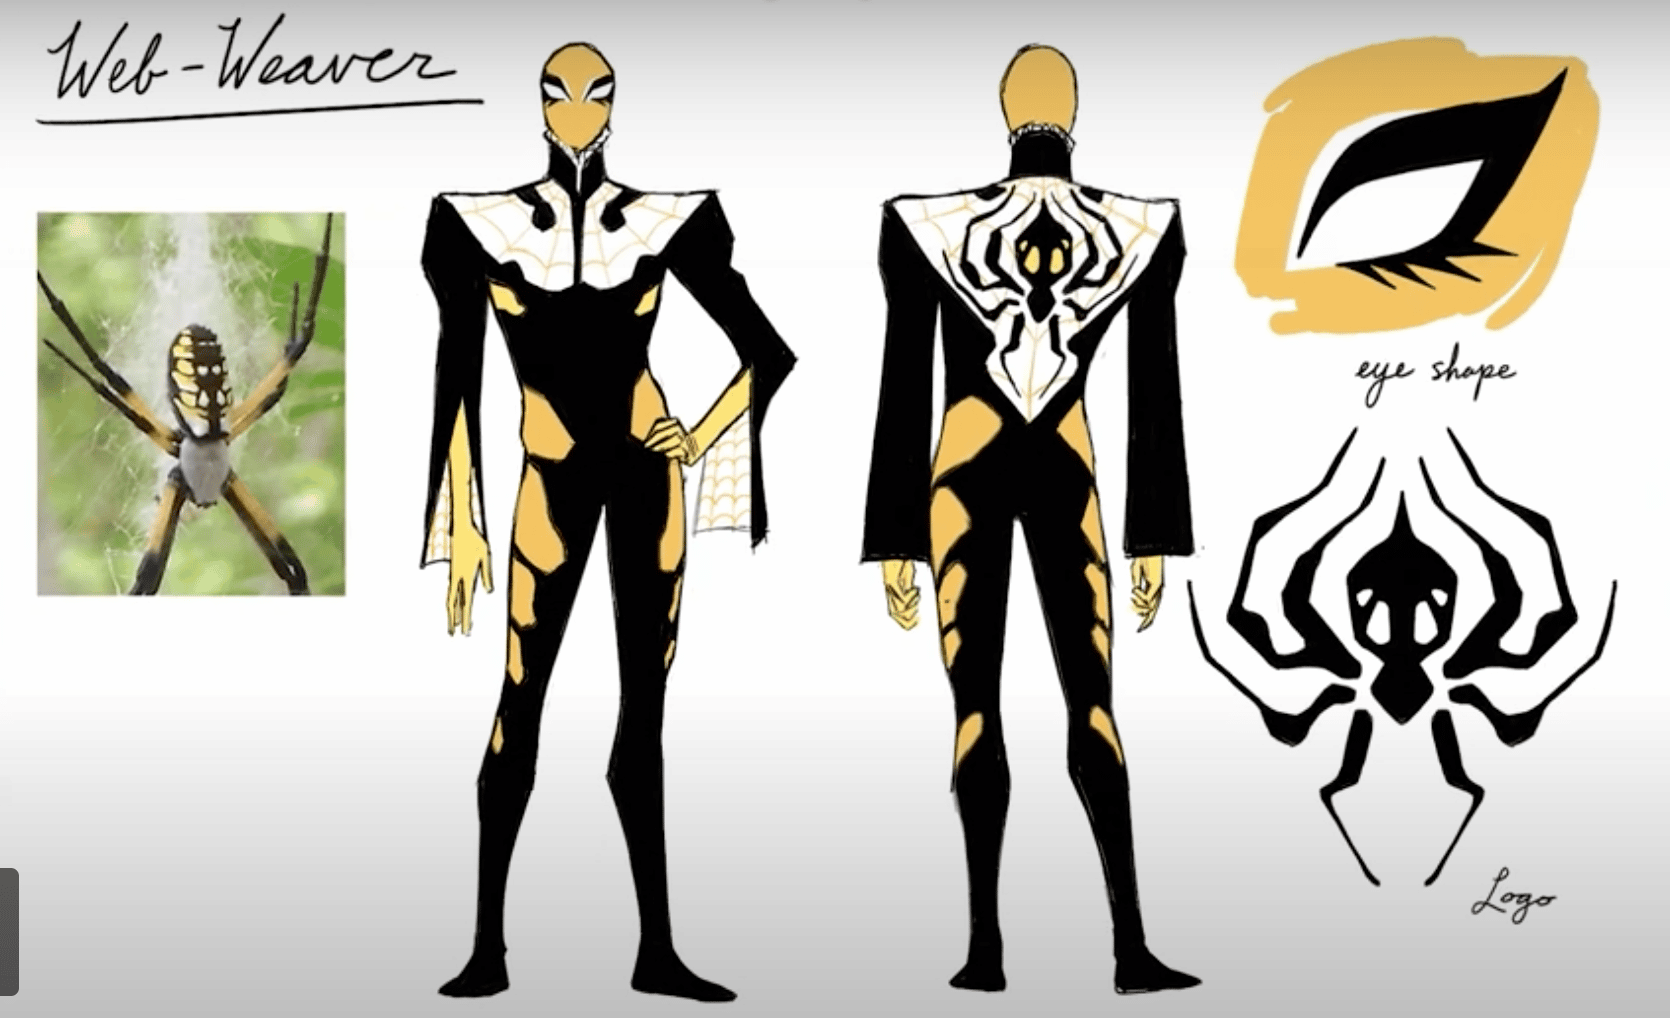 Web-Weaver, new Spider-Man character